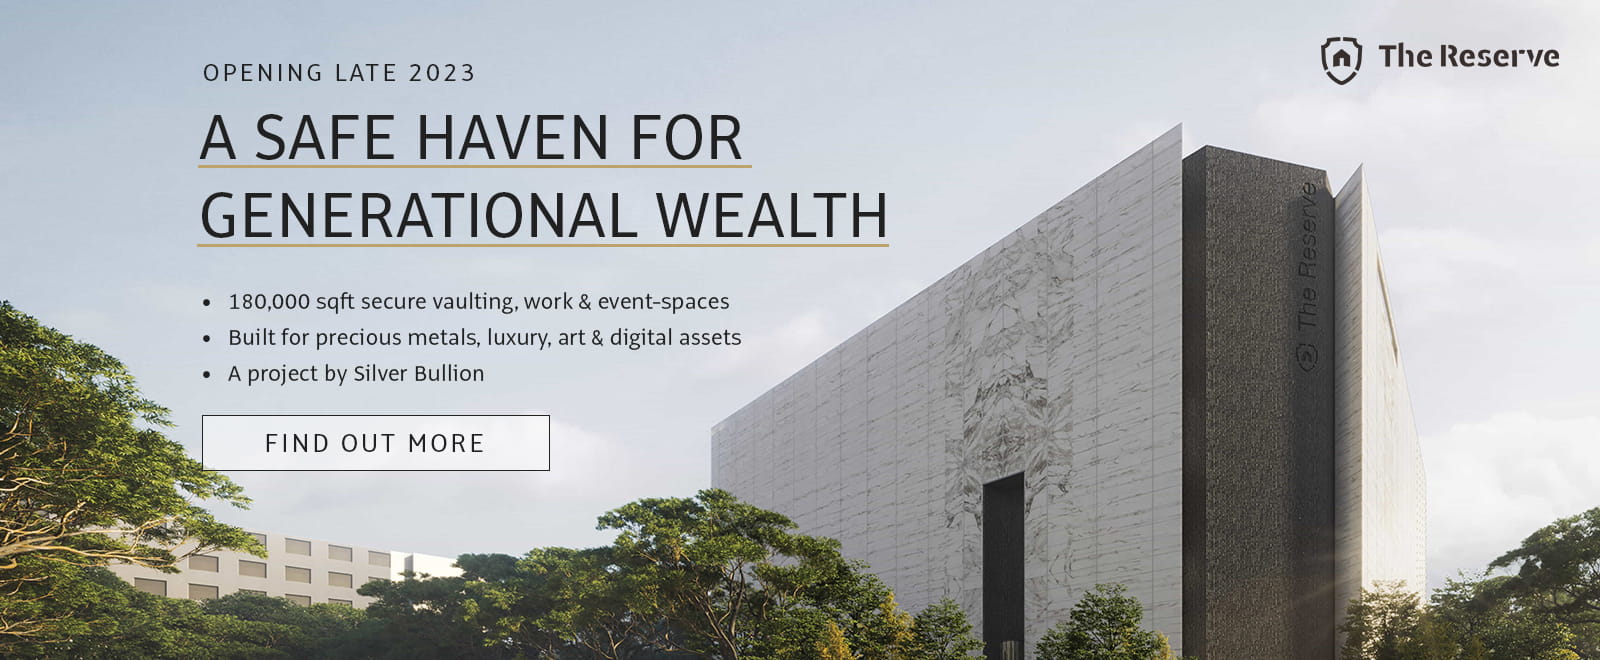 The Reserve - A Safe Haven For Generational Wealth featuring 180,000 sqft of secure vaulting & event spaces